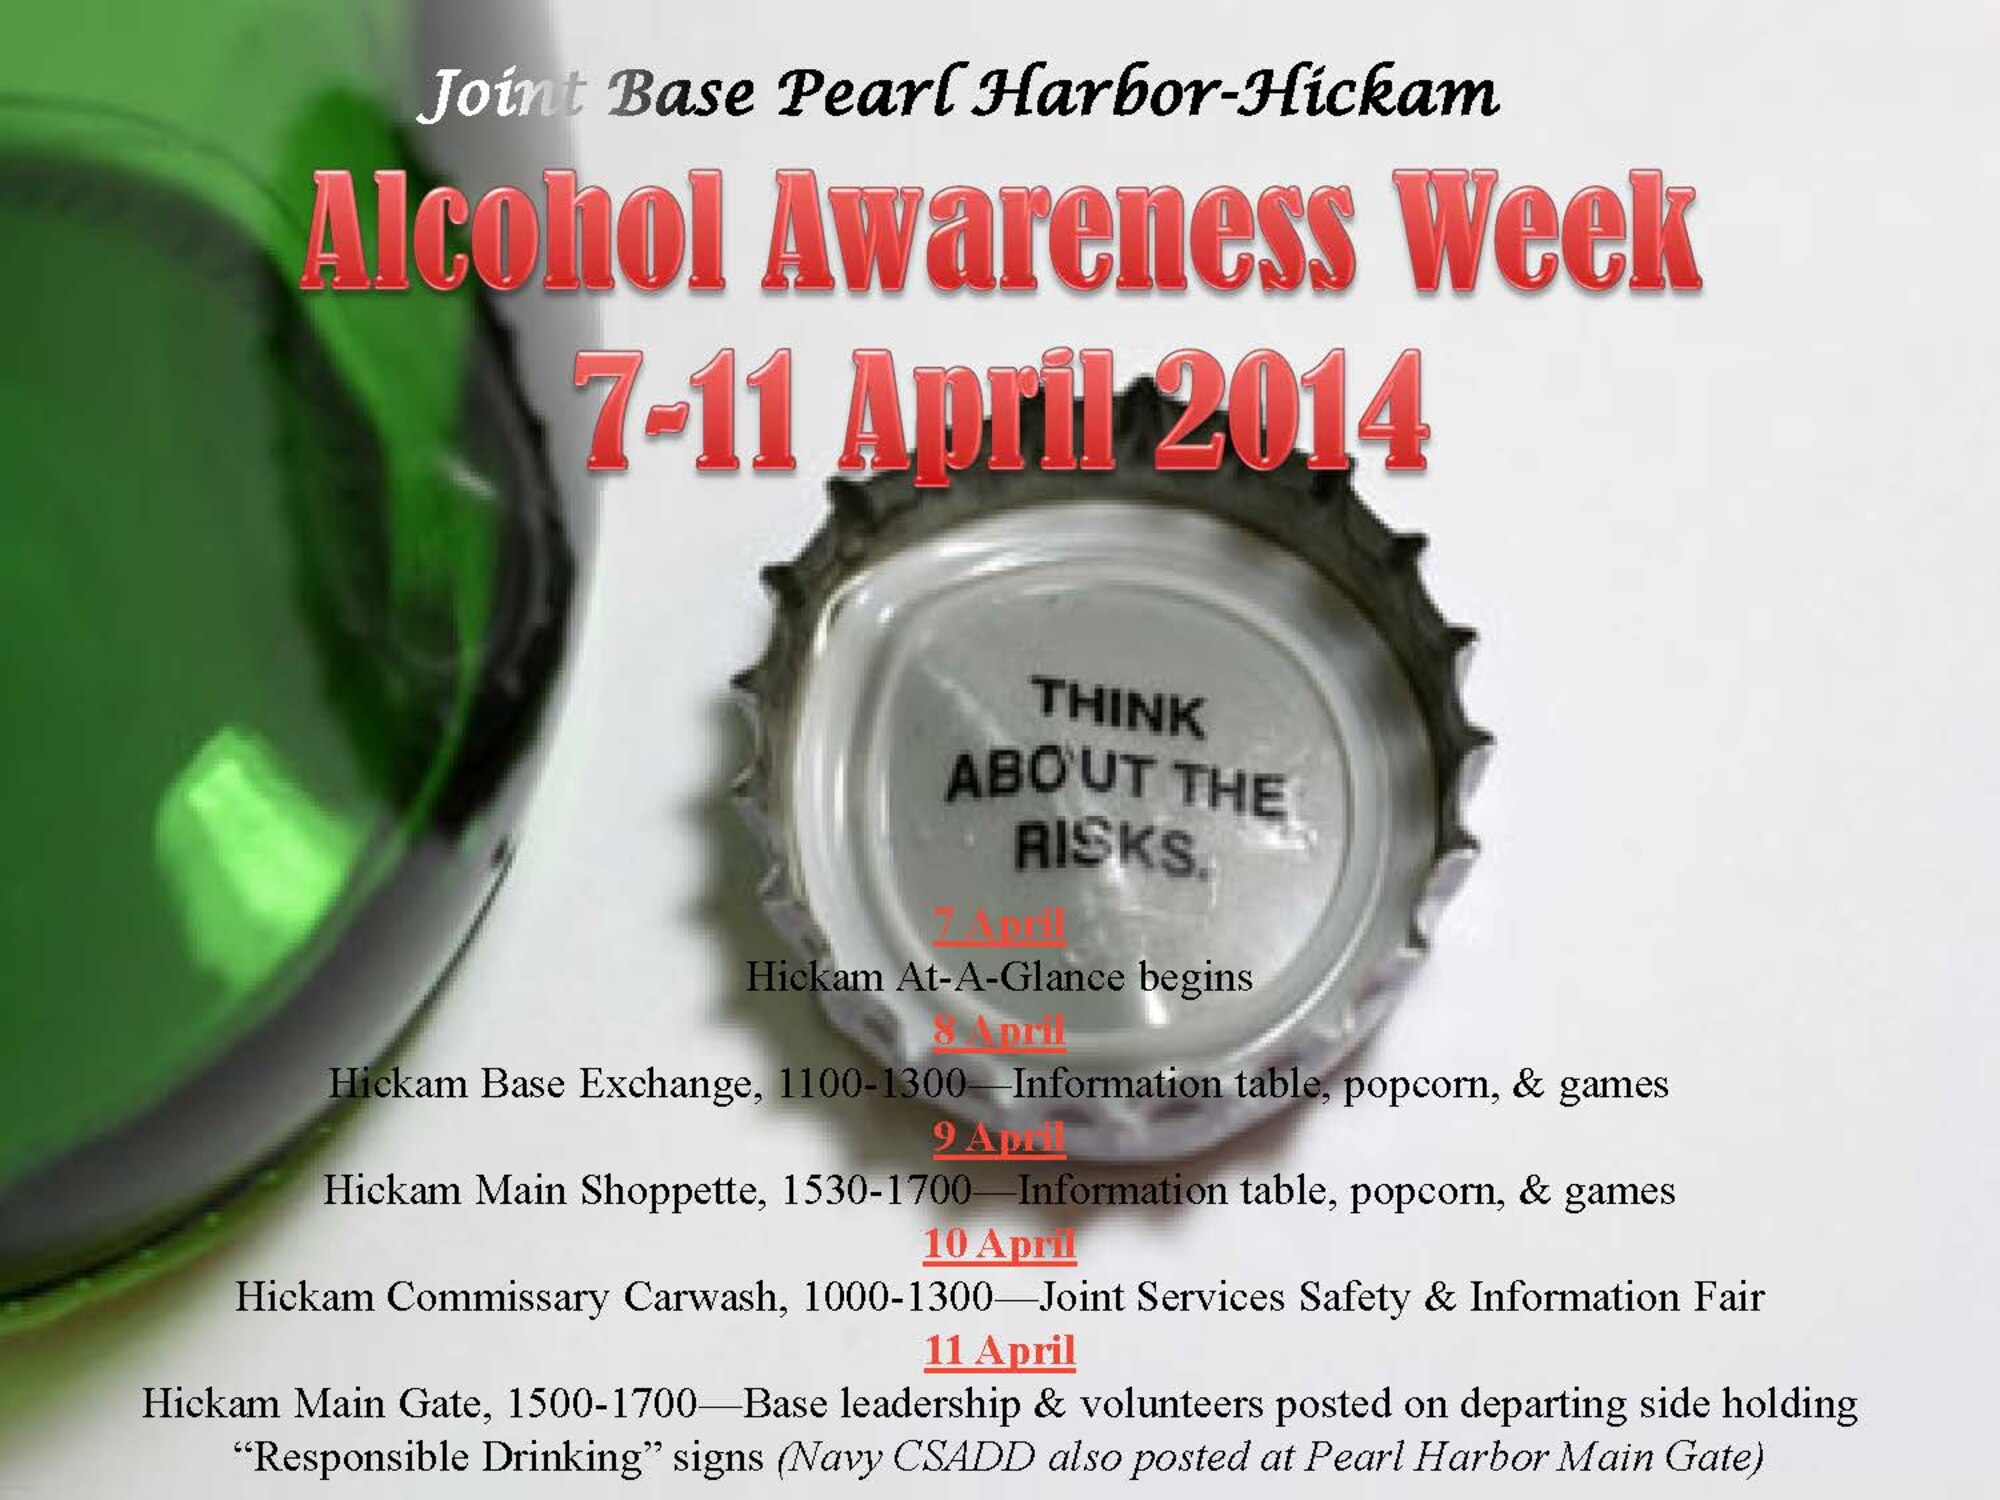 Joint Base Pearl Harbor-Hickam will observe Alcohol Awareness Week April 7-14 with a host of educational events.